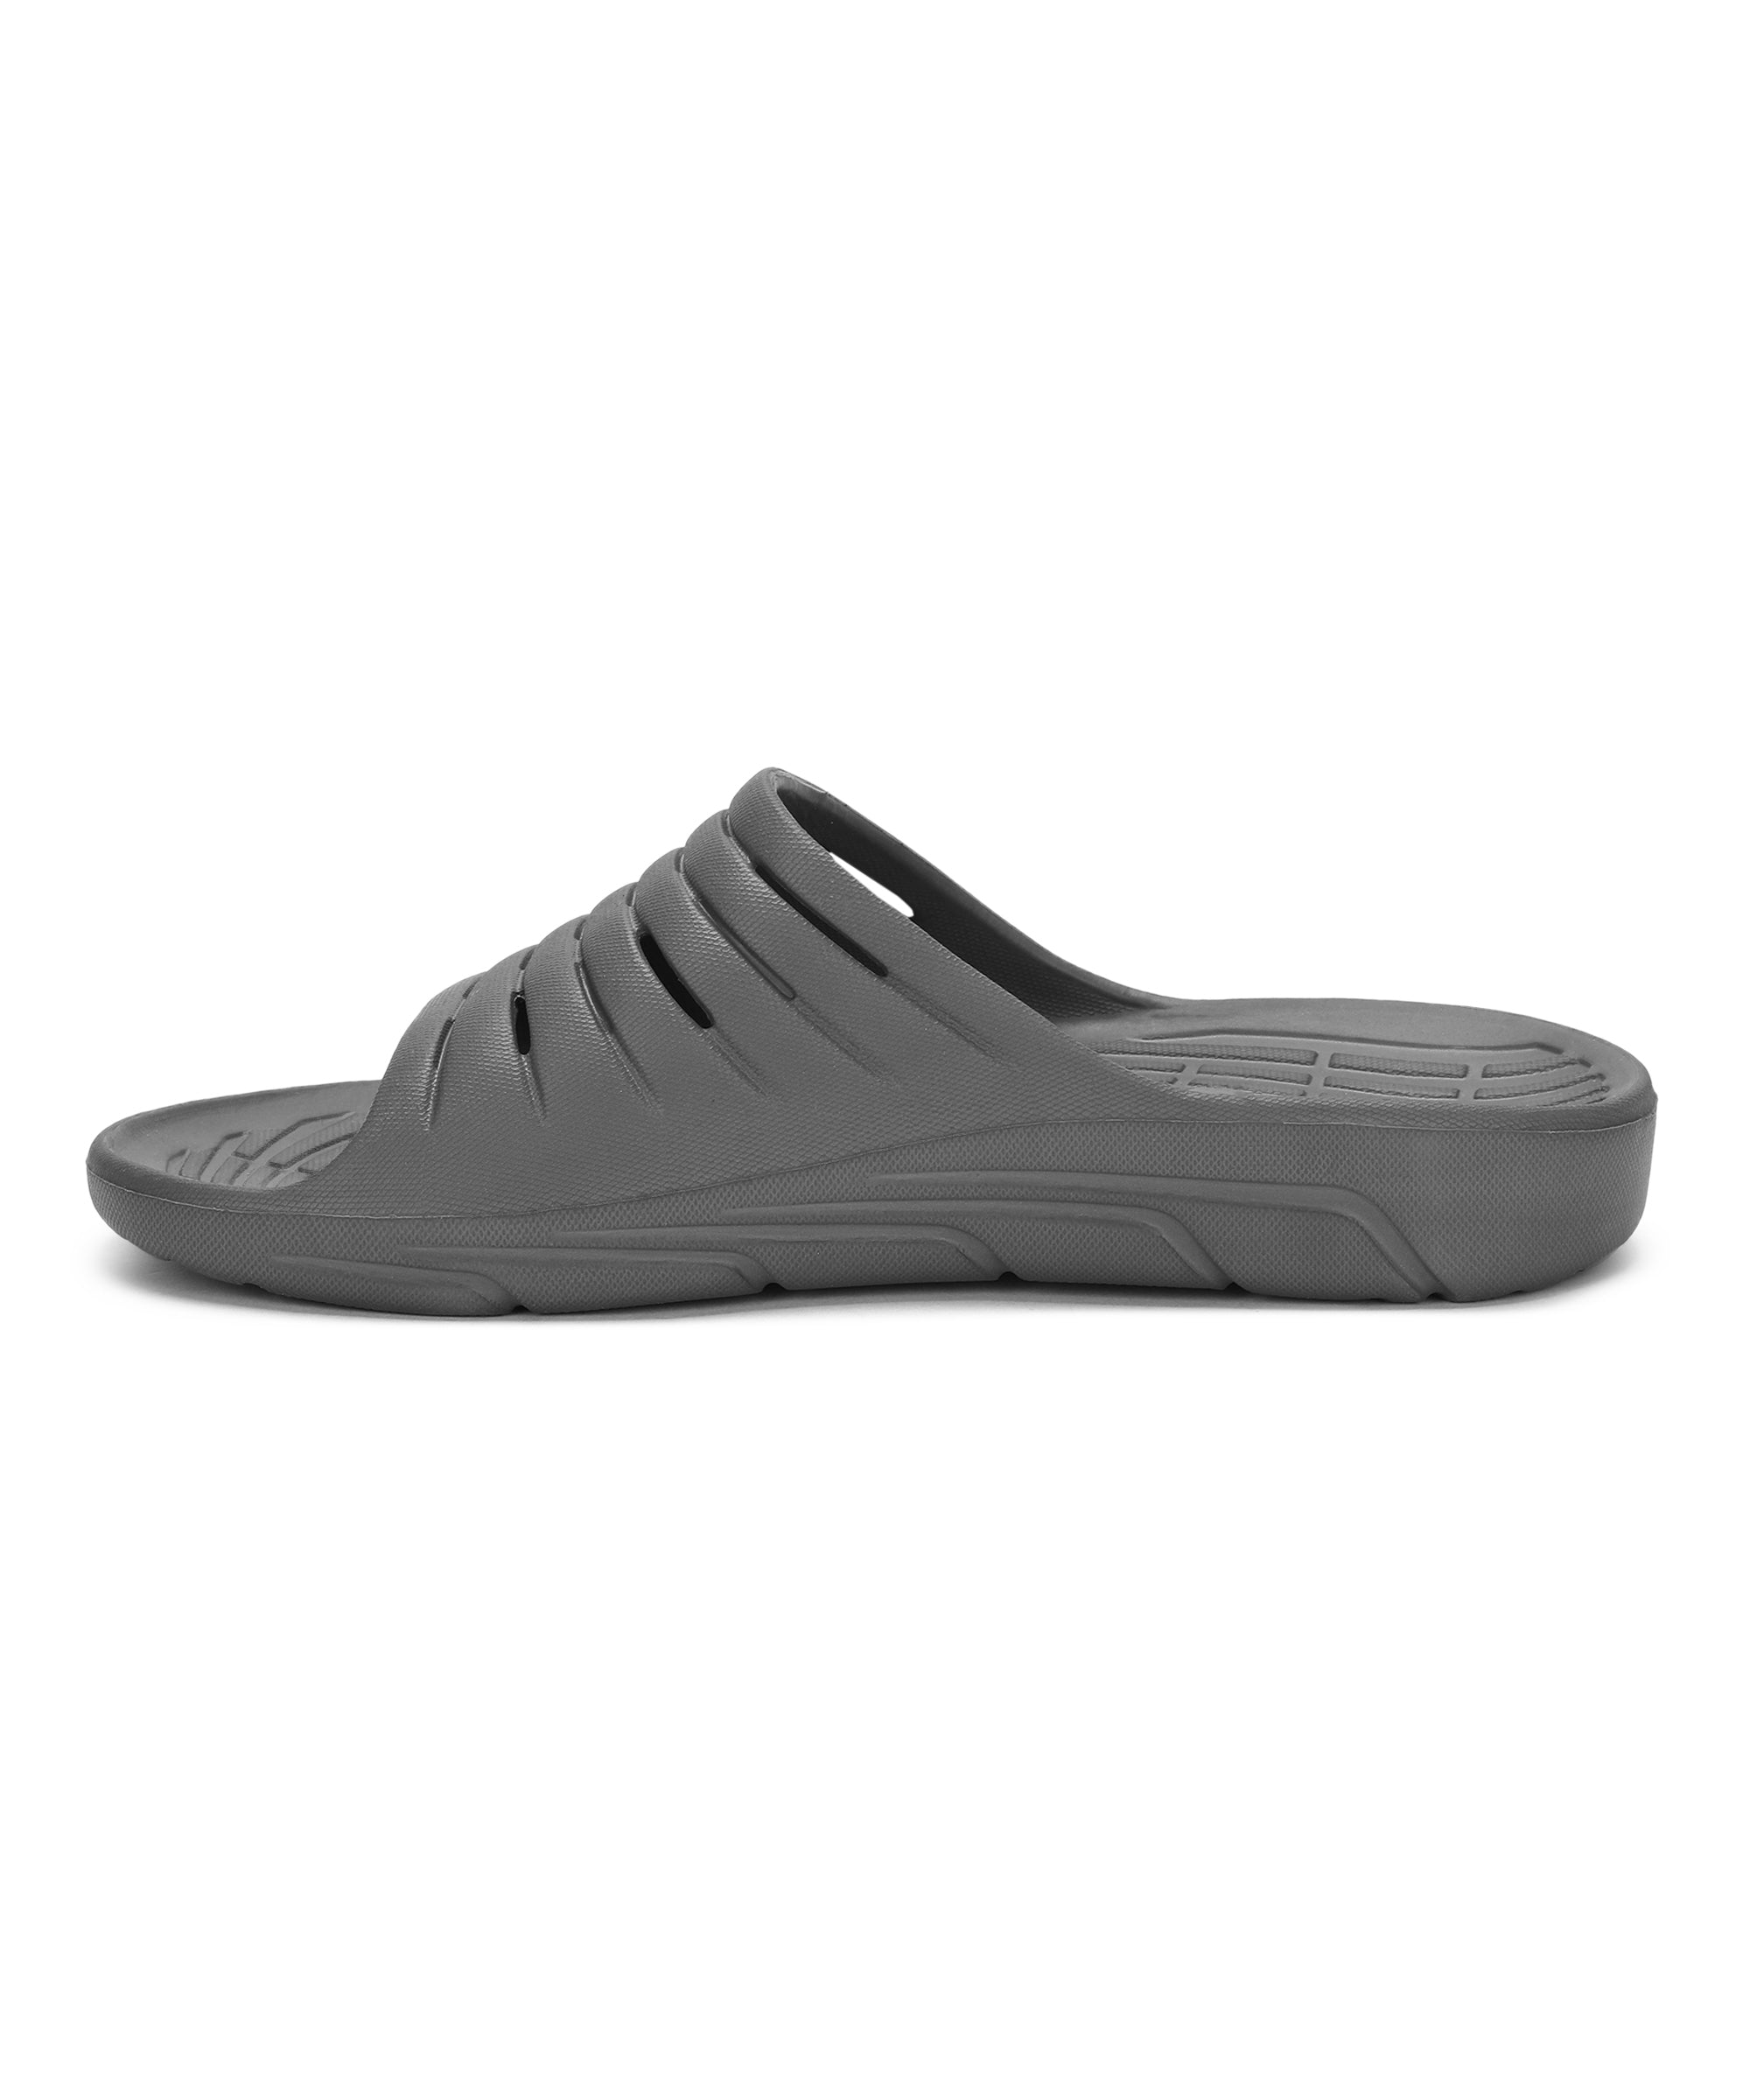 Paragon Blot K10910G Men Casual Sliders | Stylish Trendy Lightweight Slides | Casual &amp; Comfortable Slippers | For Everyday Use